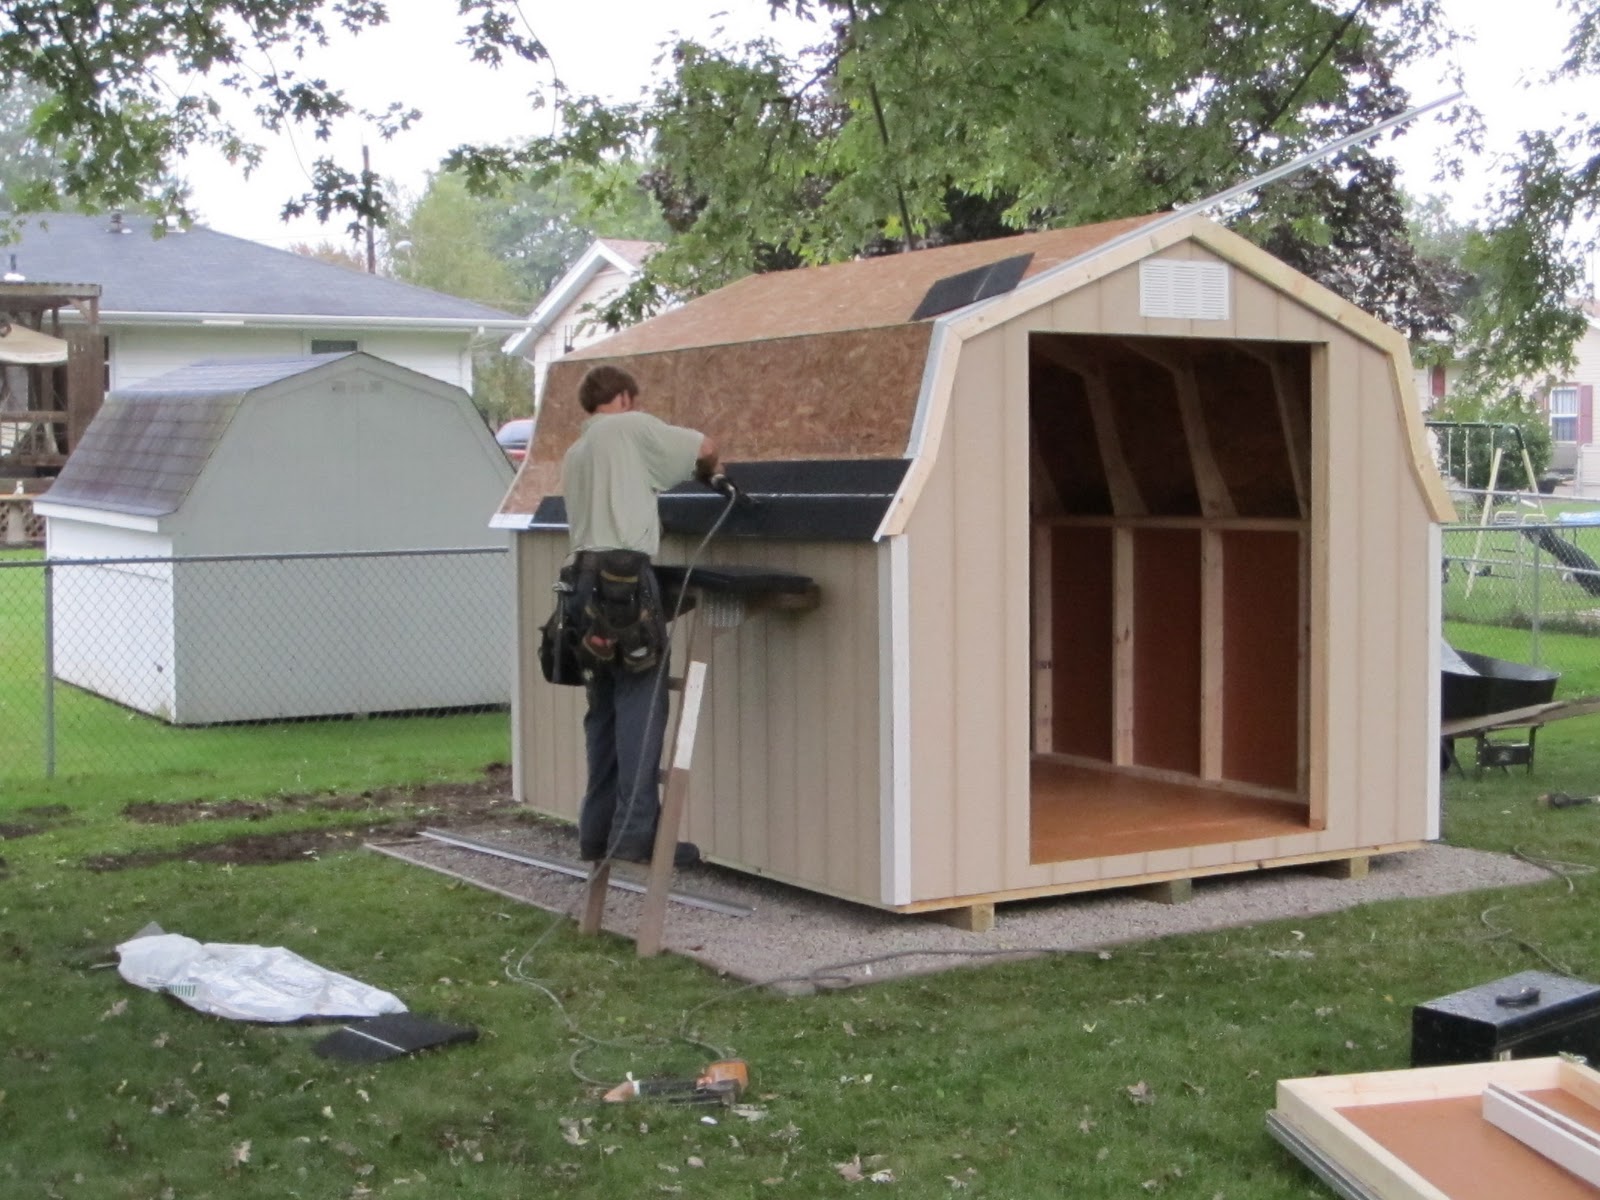 Recumbent Conspiracy Theorist: Shed Construction Complete